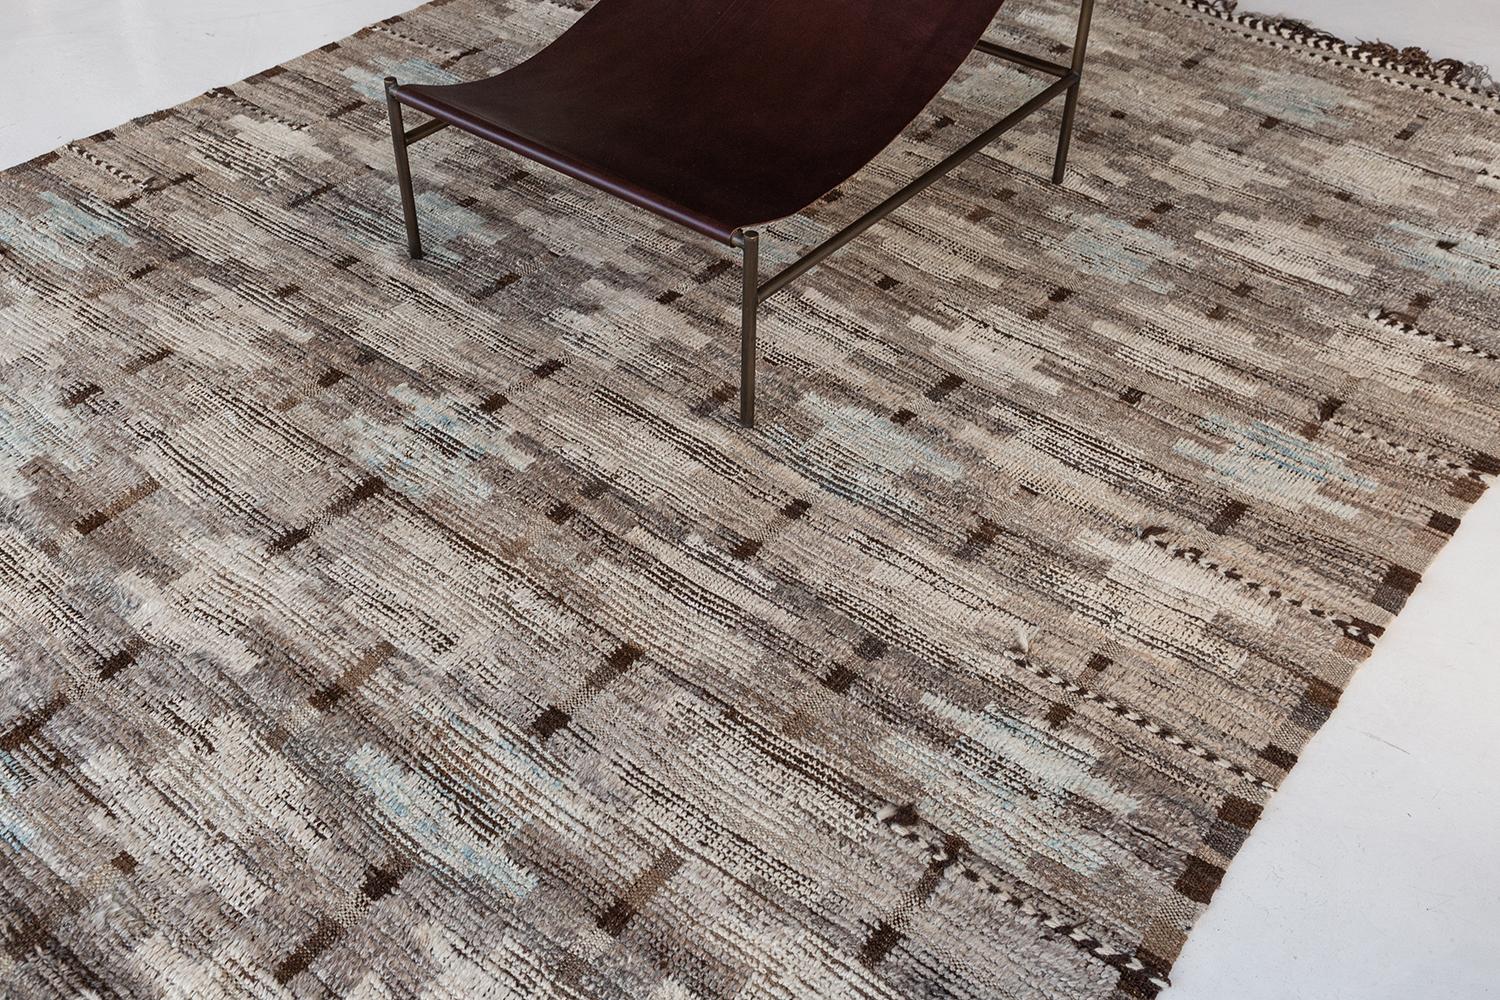 <p>The 'Umea' rug is a handwoven wool piece inspired by vintage Scandinavian design elements and recreated for the modern design world. The rug's shag balance and harmony, hand woven with a neutral flat weave and unique piles of taupe and orange